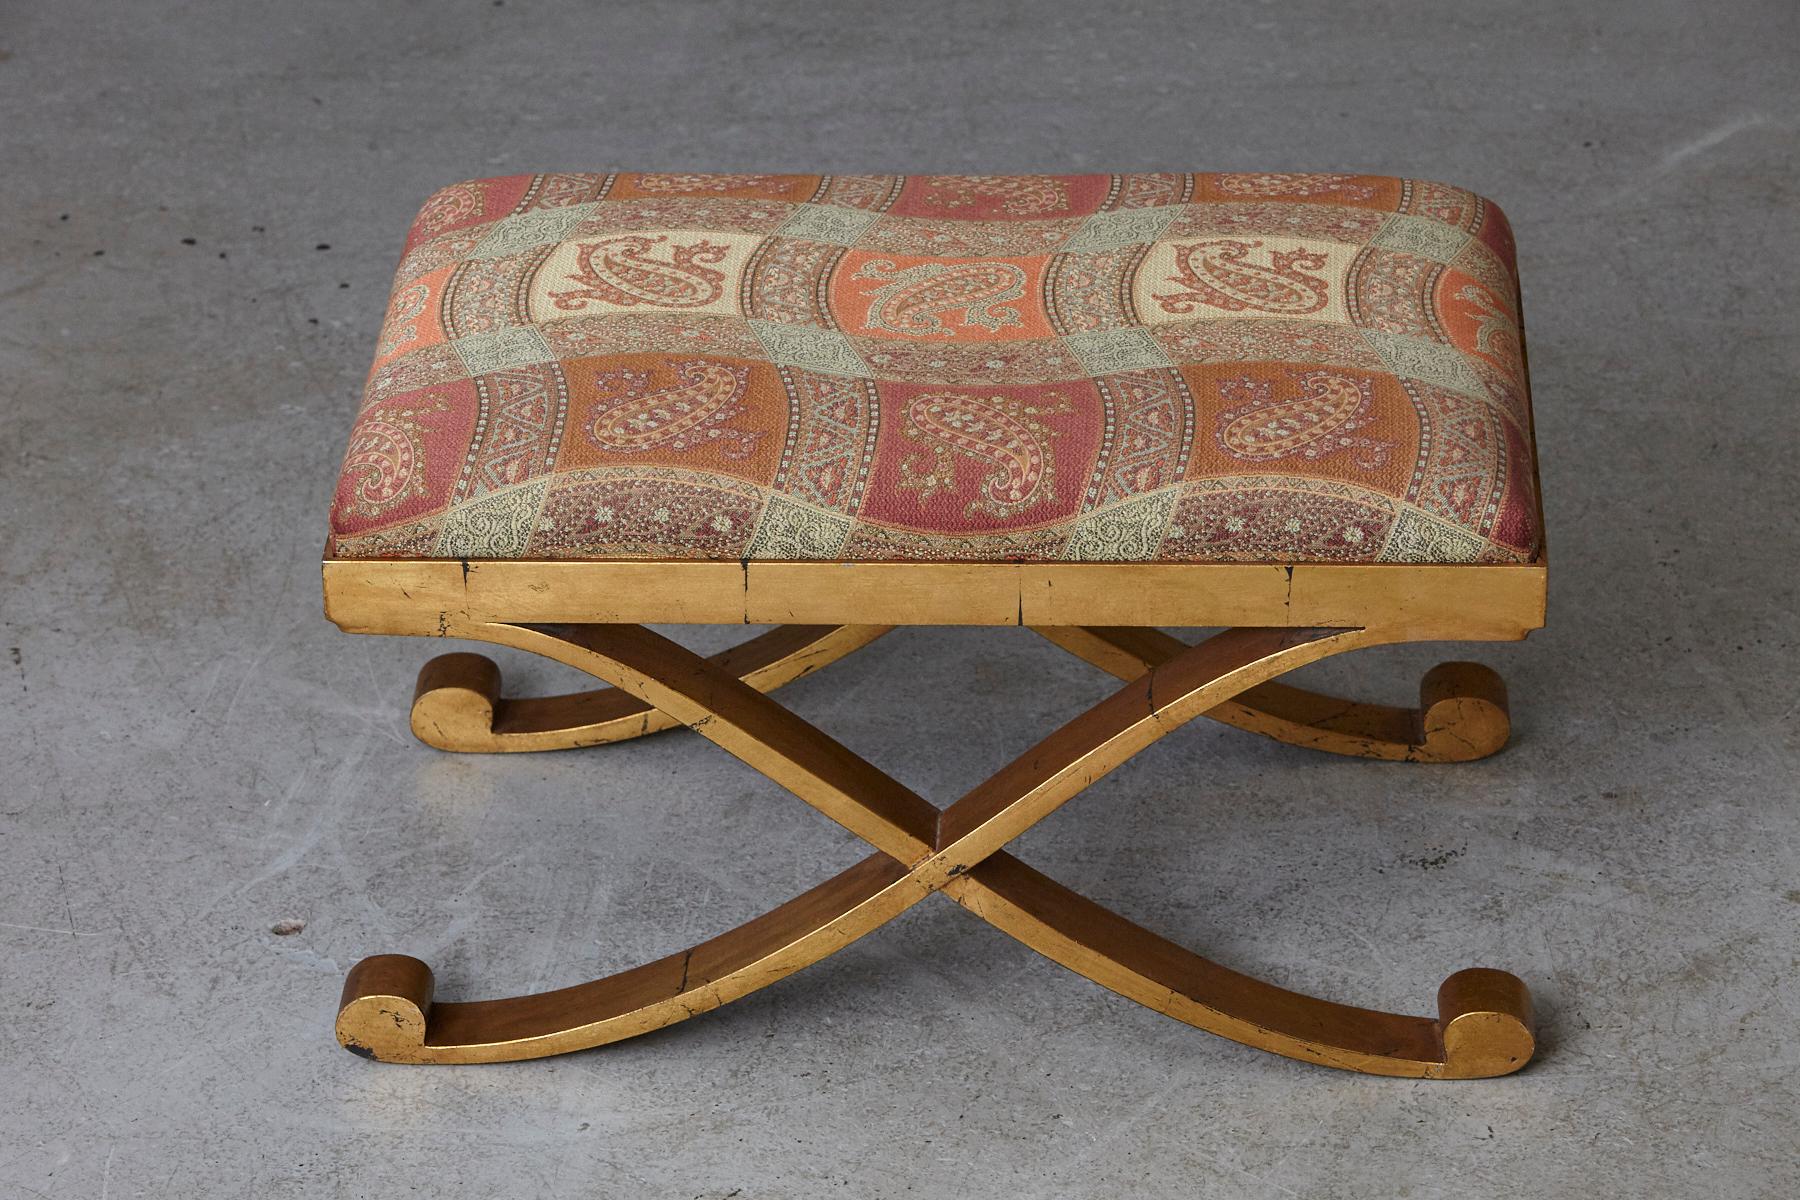 Gild Patinated Metal Bench with Cross Legs Upholstered in Paisley Fabric 1